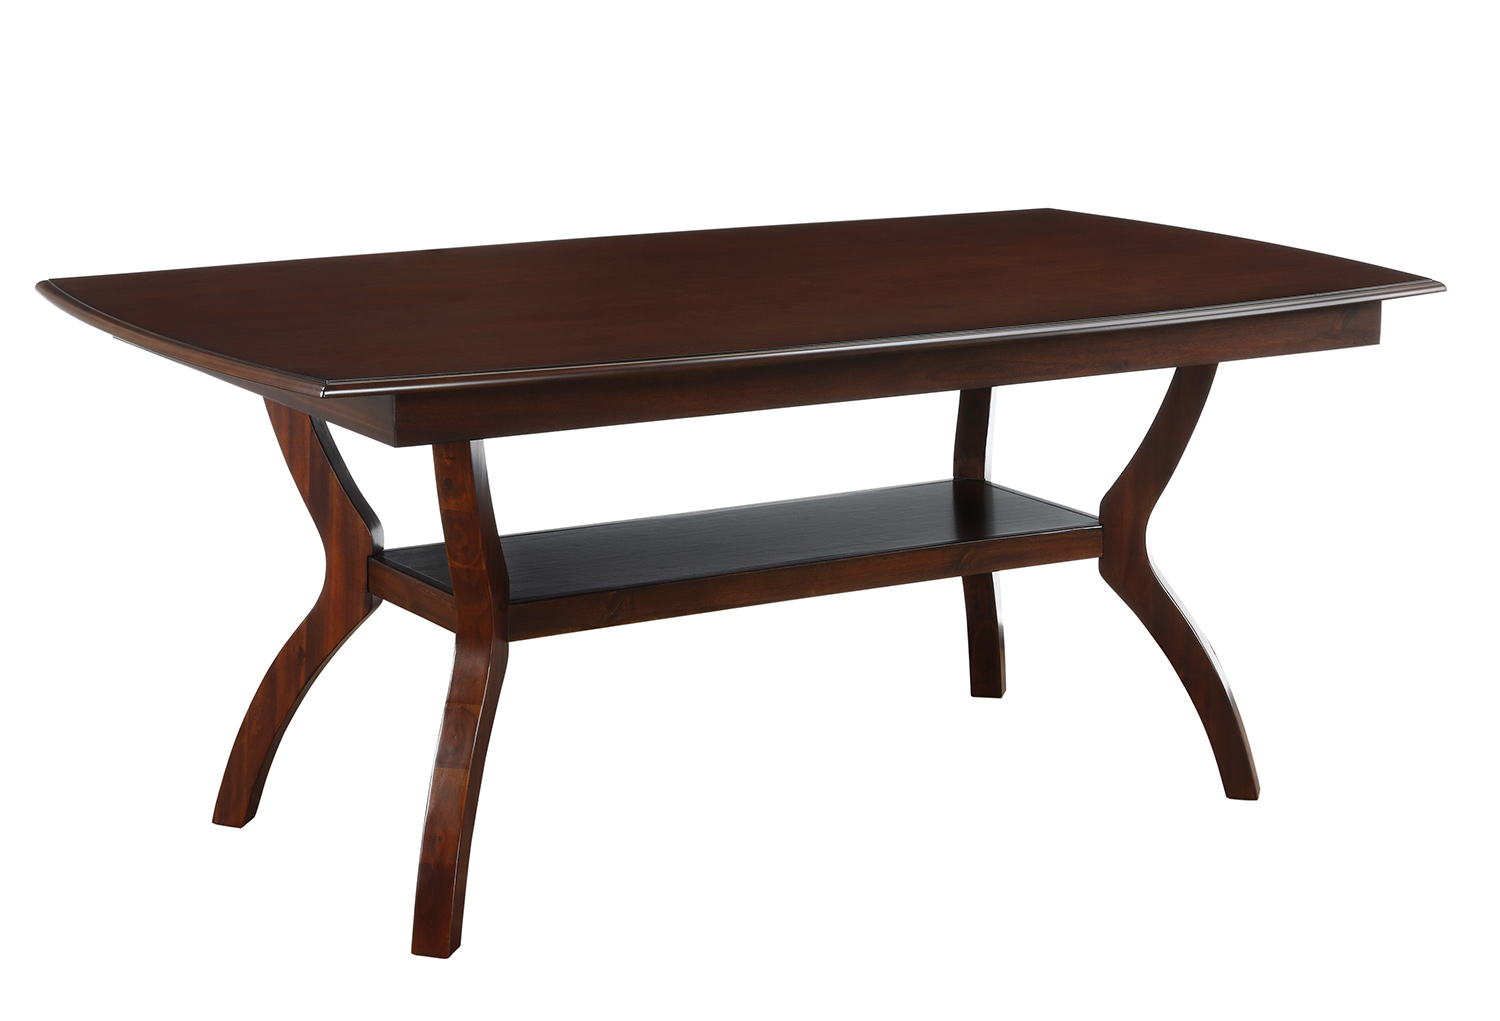 Homelegance Whitby Dining Table - Cherry 5617-72 at Homelement.com